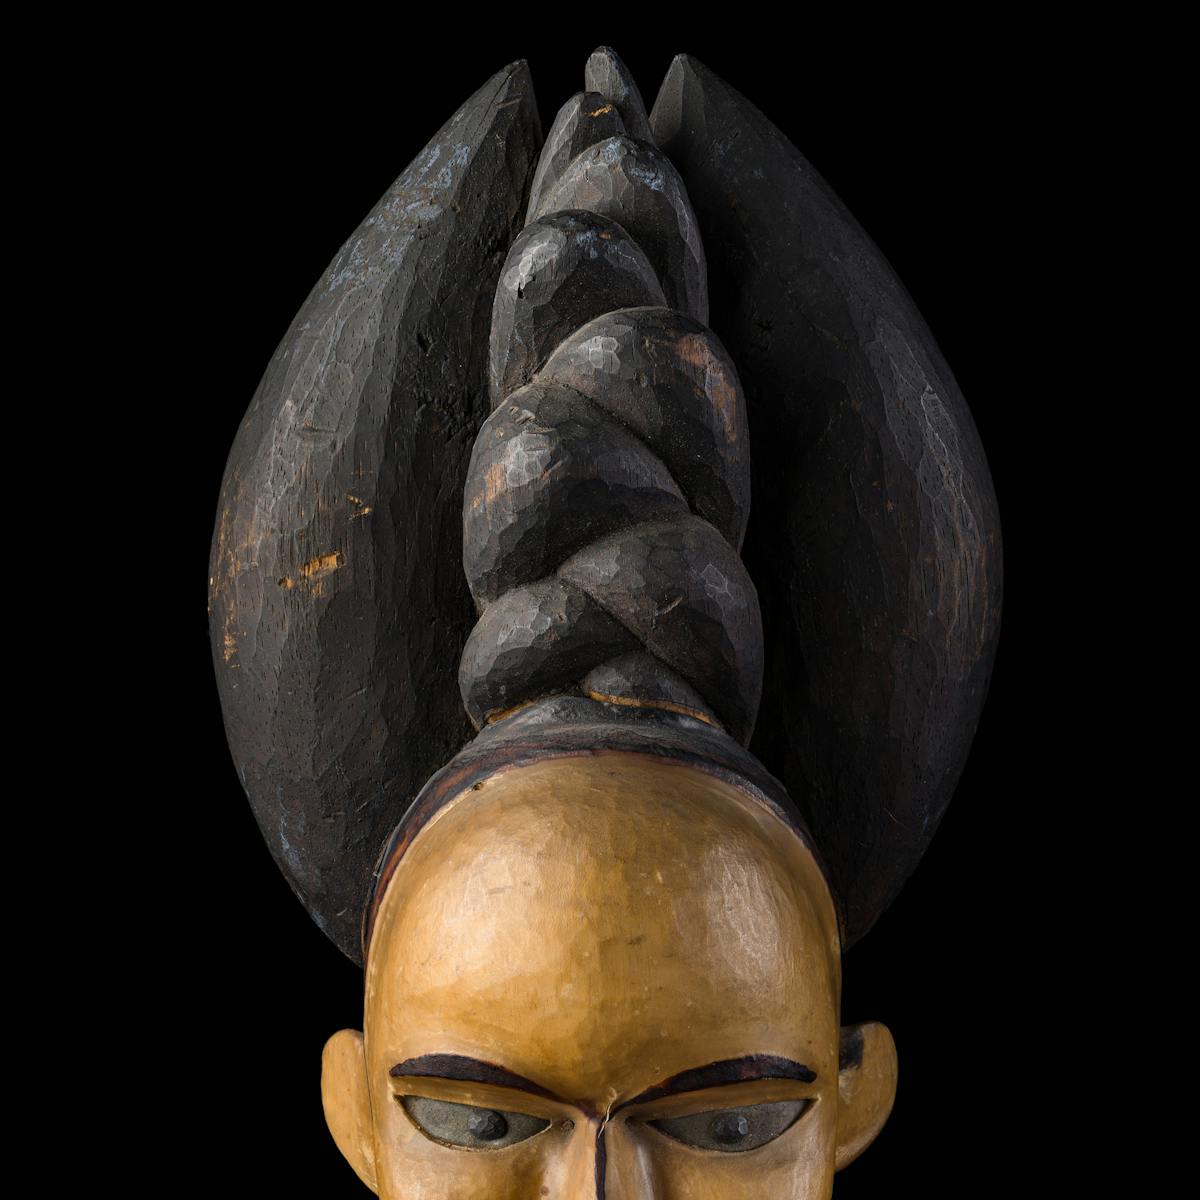 Photograph of the carved wooden head of a woman against a black background. On the woman's head is an elaborate headdress. The head is cropped by the bottom of the frame just below her eyes.